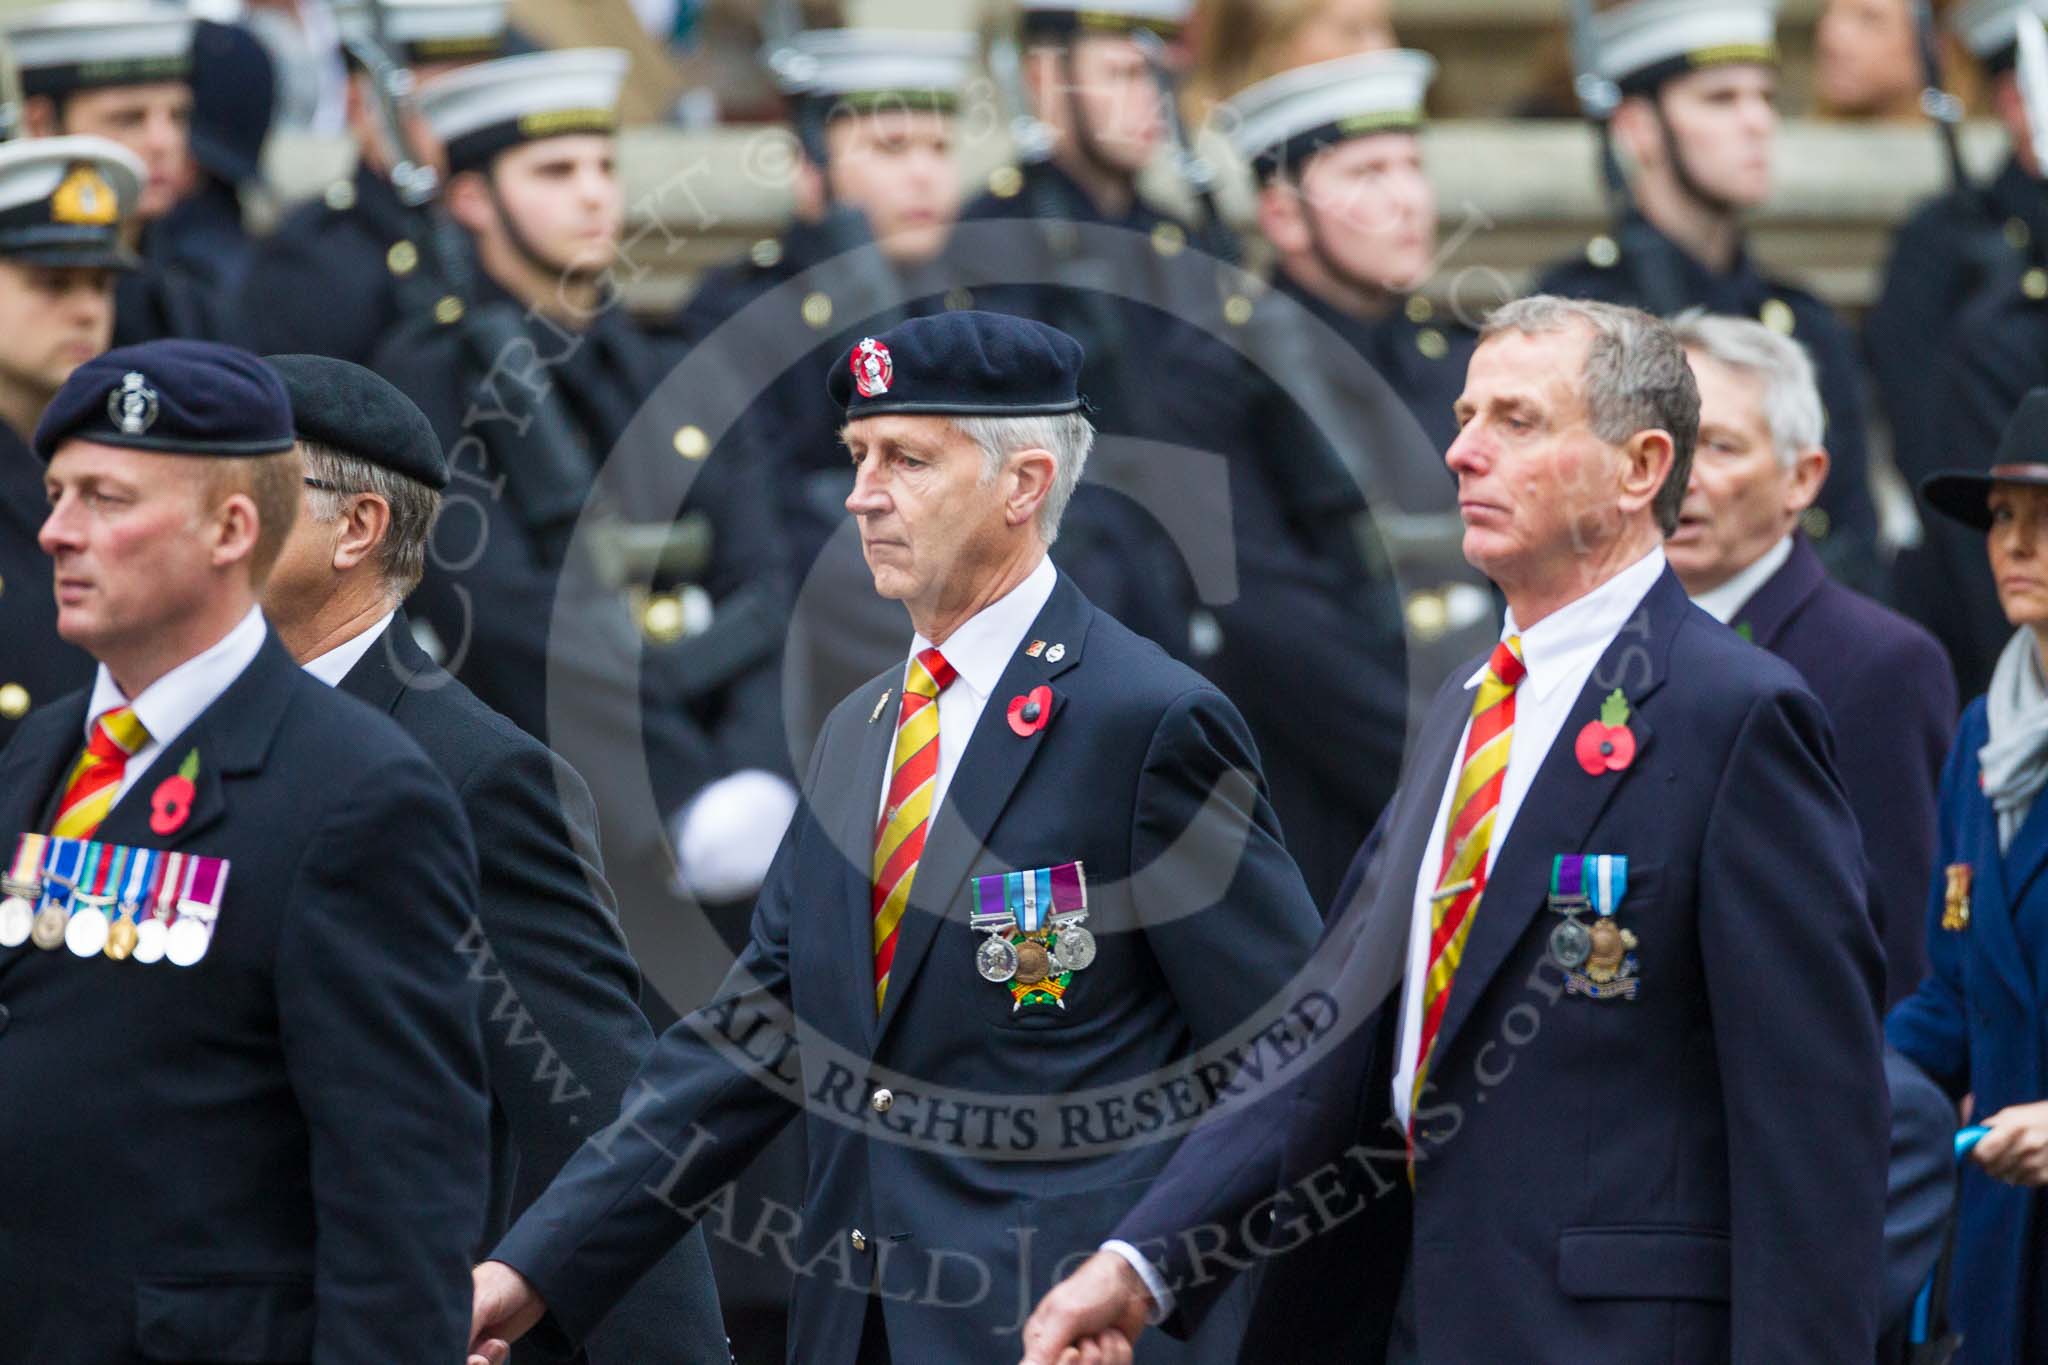 Remembrance Sunday at the Cenotaph 2015: Group B28, JLR RAC Old Boys' Association.
Cenotaph, Whitehall, London SW1,
London,
Greater London,
United Kingdom,
on 08 November 2015 at 11:42, image #228